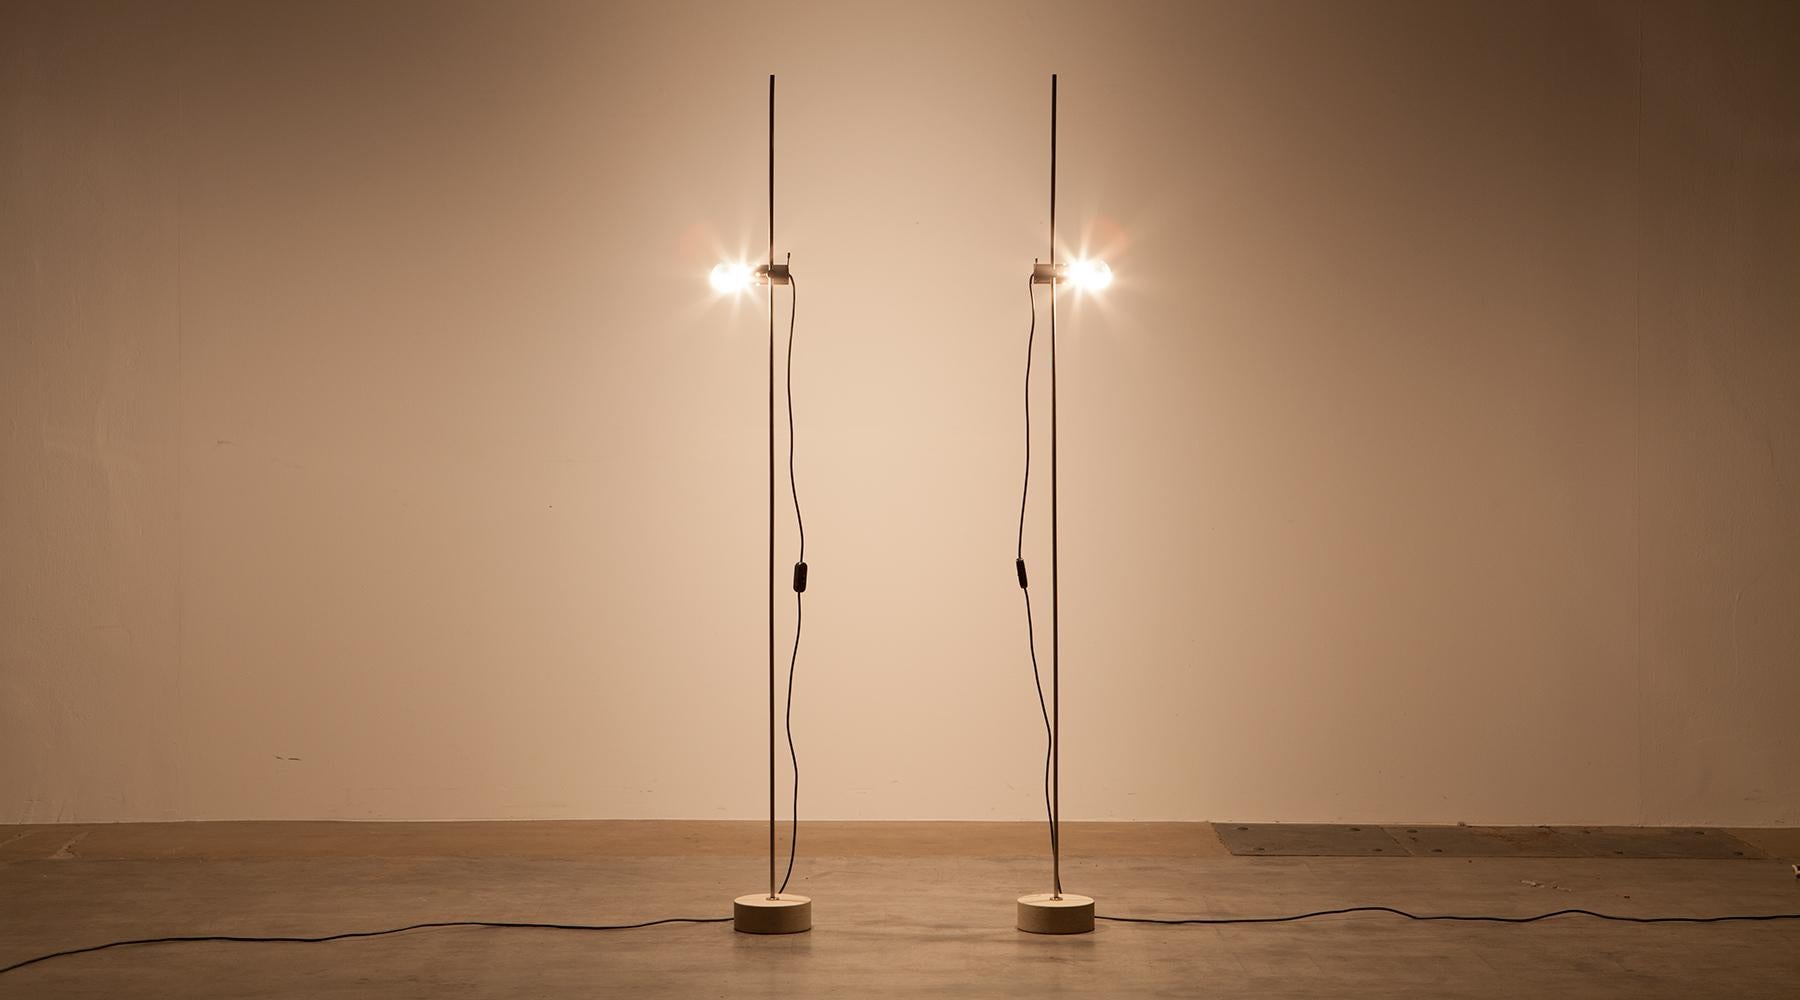 Pair of floor lamps, nickel-plated metal, Tito Agnoli, Italy, 1954.

These two floor lamps are from the Cornalux series and Tito Agnoli´s first eyebrow raiser during his time at O-Luce. The Cornalux, a Hammer shaped, blown, hand assembled light